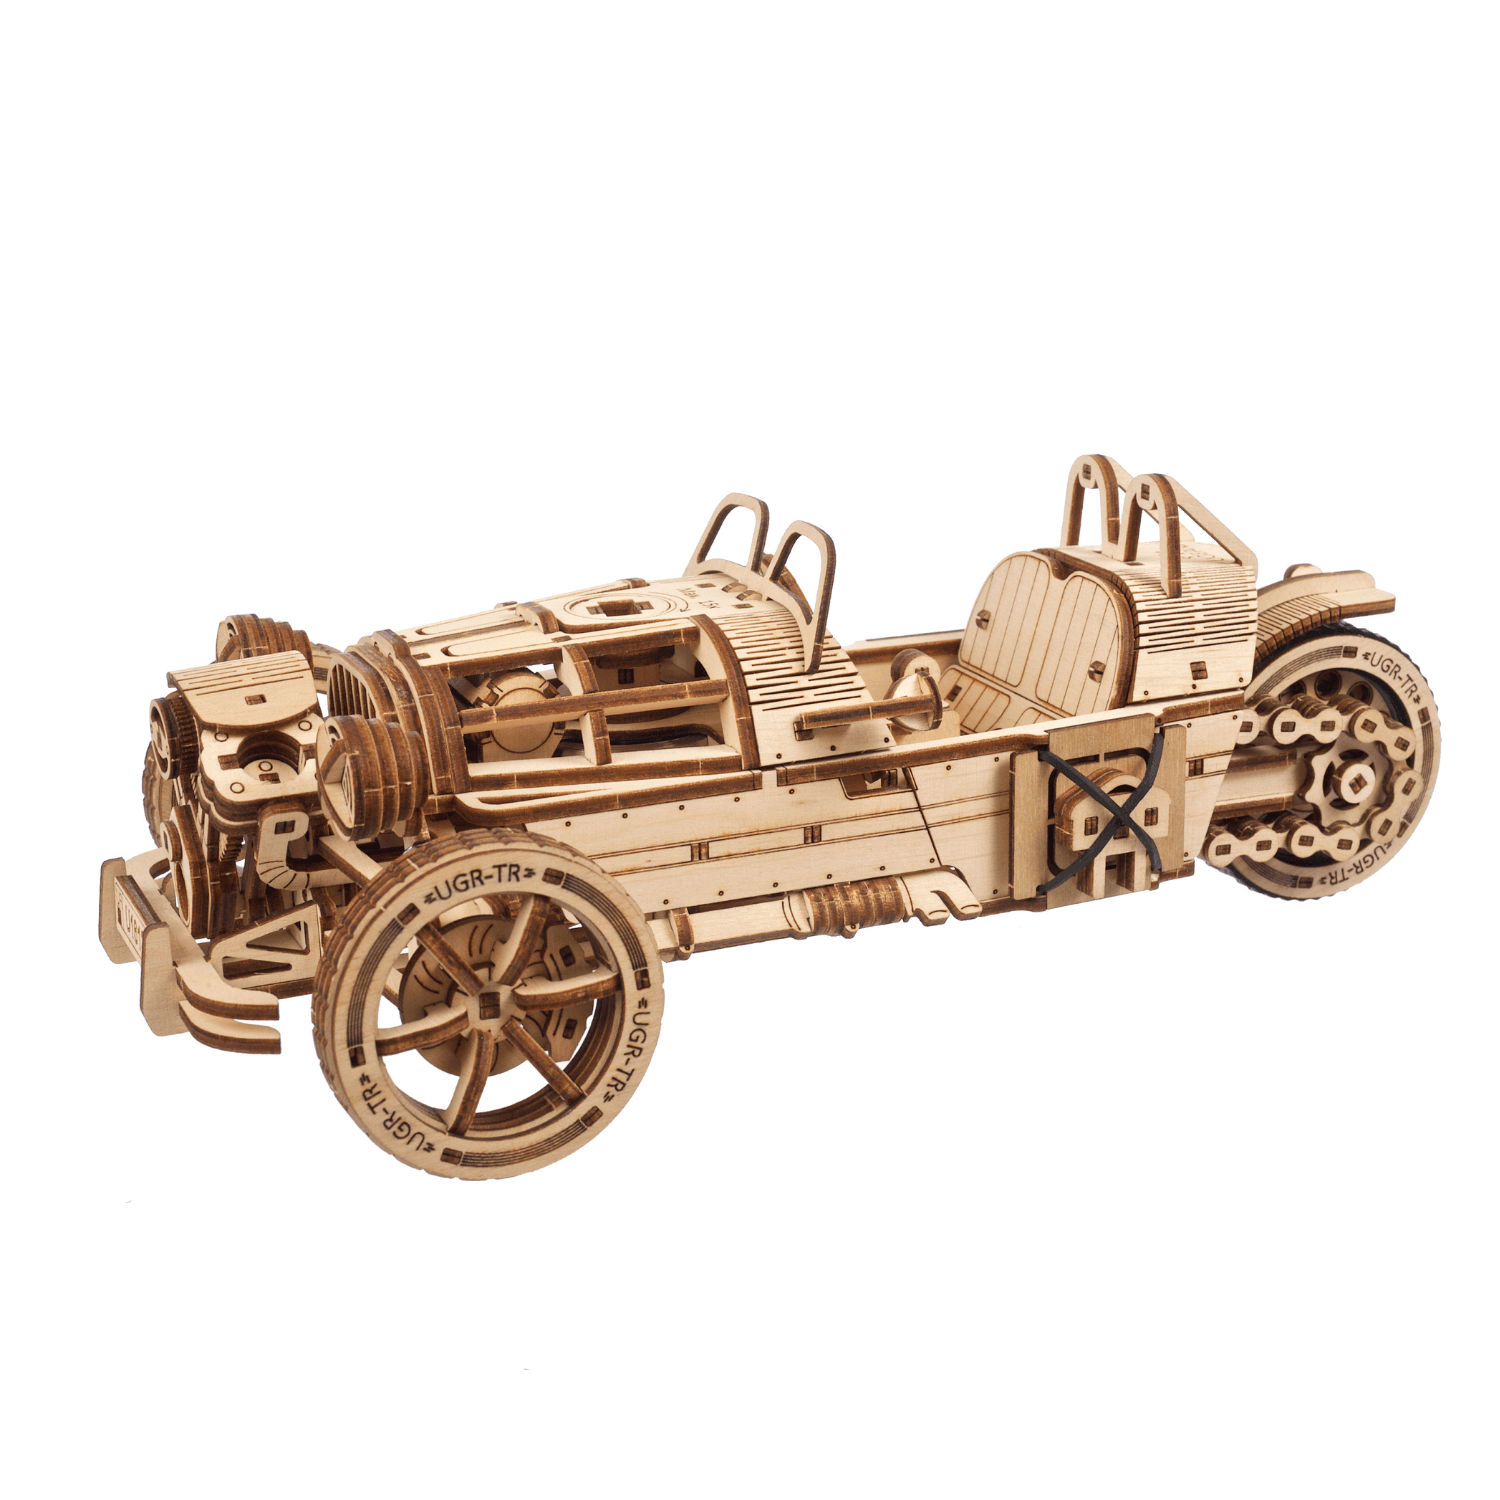 Tricycle Vehicle UGR-S-Mechanical Wooden Puzzle-Ugears--